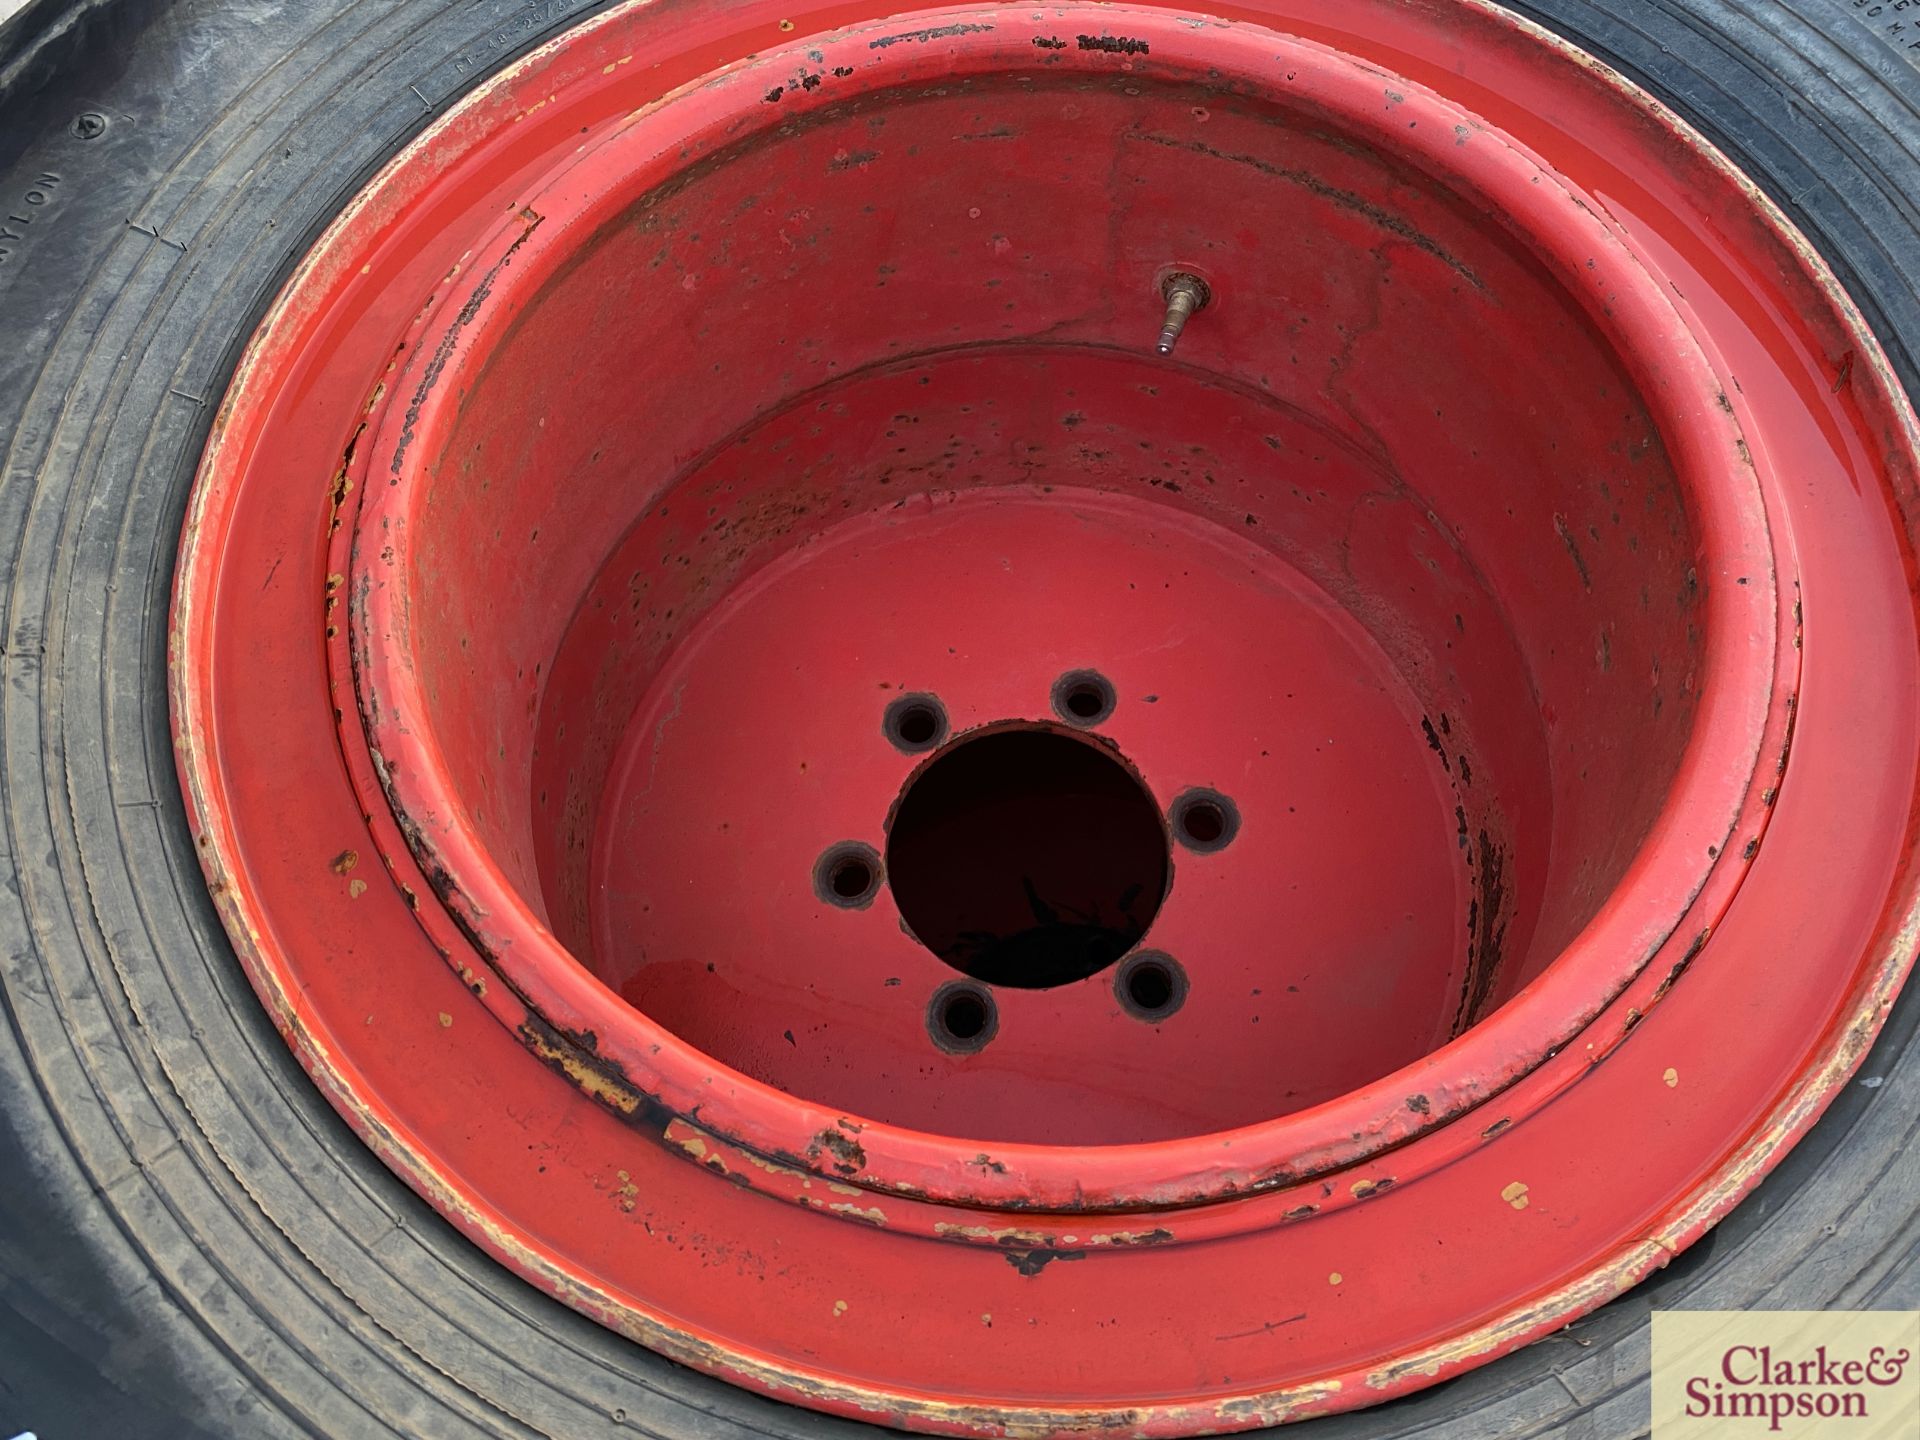 Set of 48x25.00-20 flotation wheels and tyres to fit Sands sprayer. * - Image 6 of 6